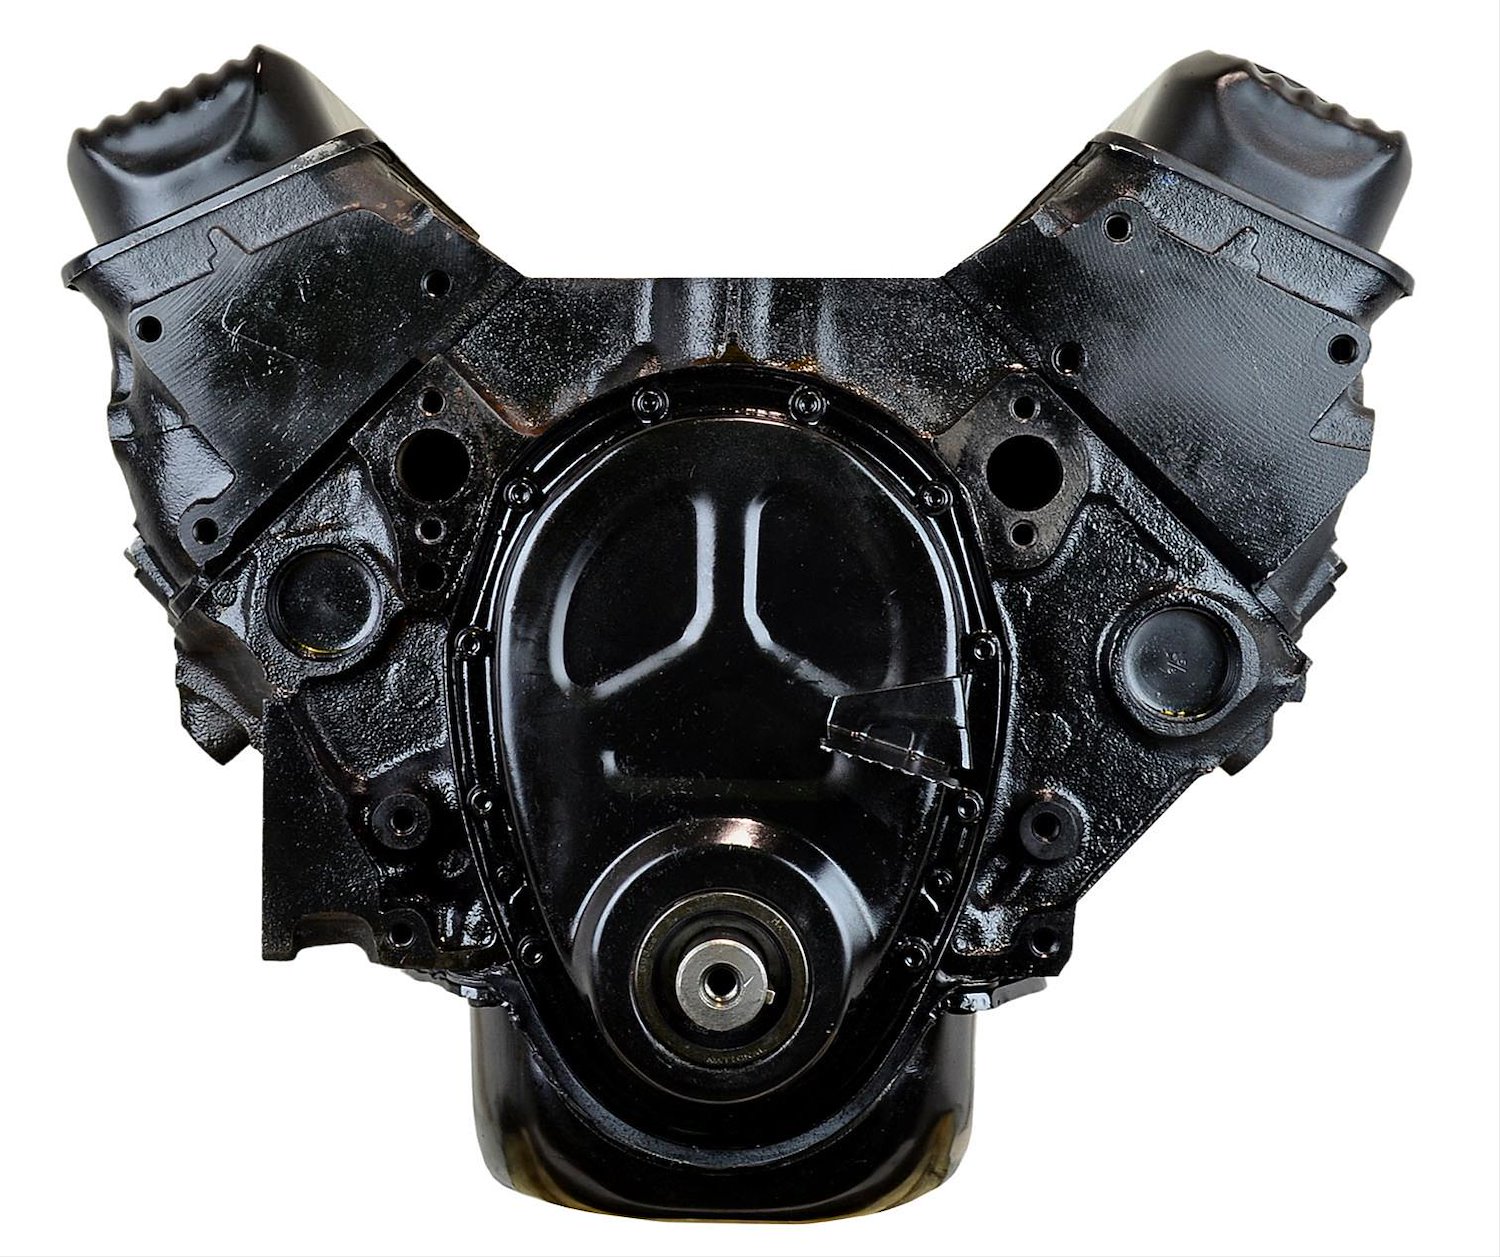 STANDARD ROTATION 200 & 230 HP SUPPLIED WITH OIL PAN AND TIMING COVER 1 PIECE REAR MAIN SEAL VALVE C